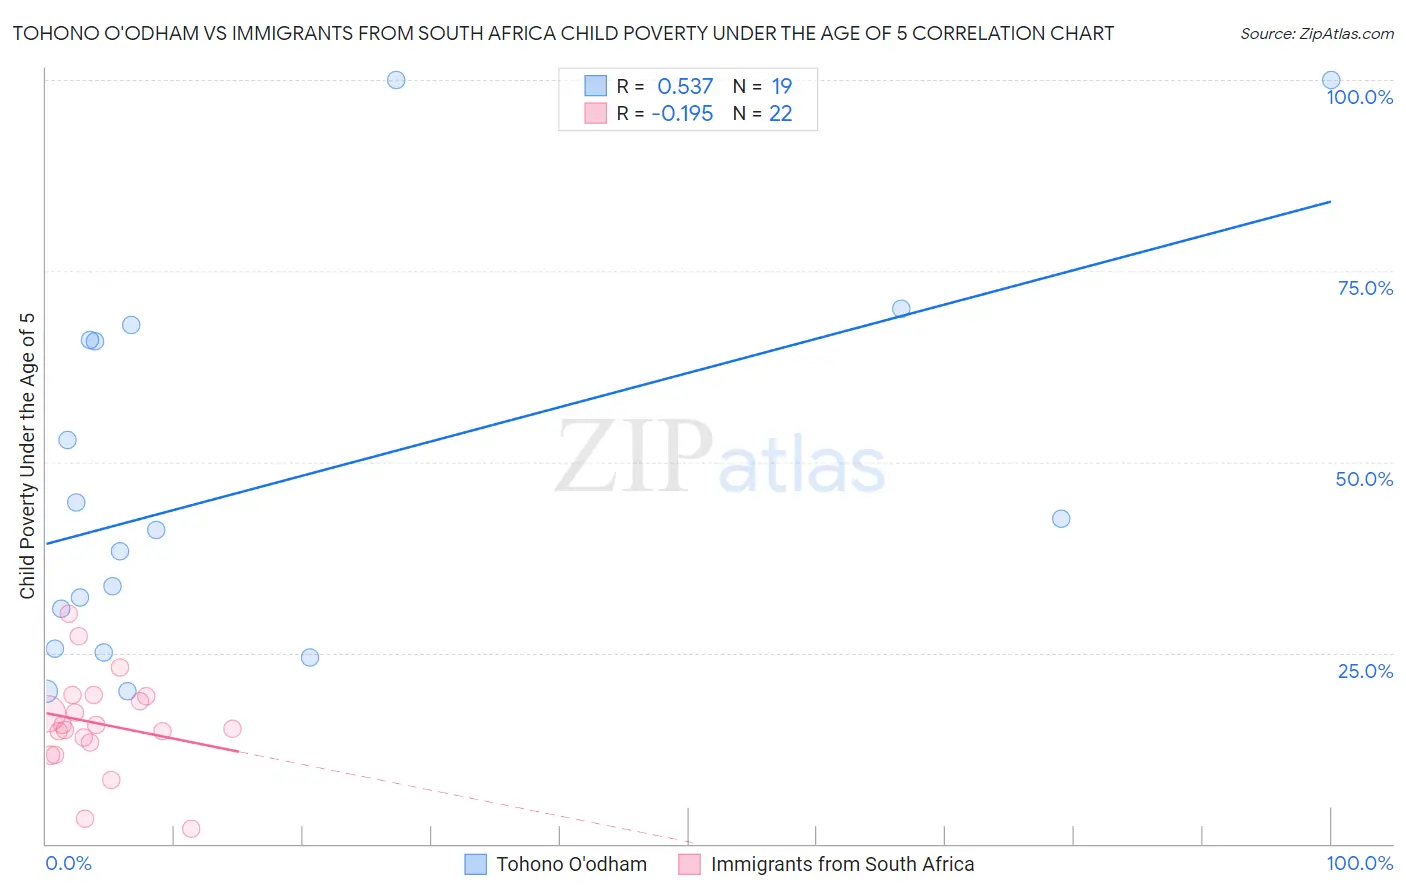 Tohono O'odham vs Immigrants from South Africa Child Poverty Under the Age of 5